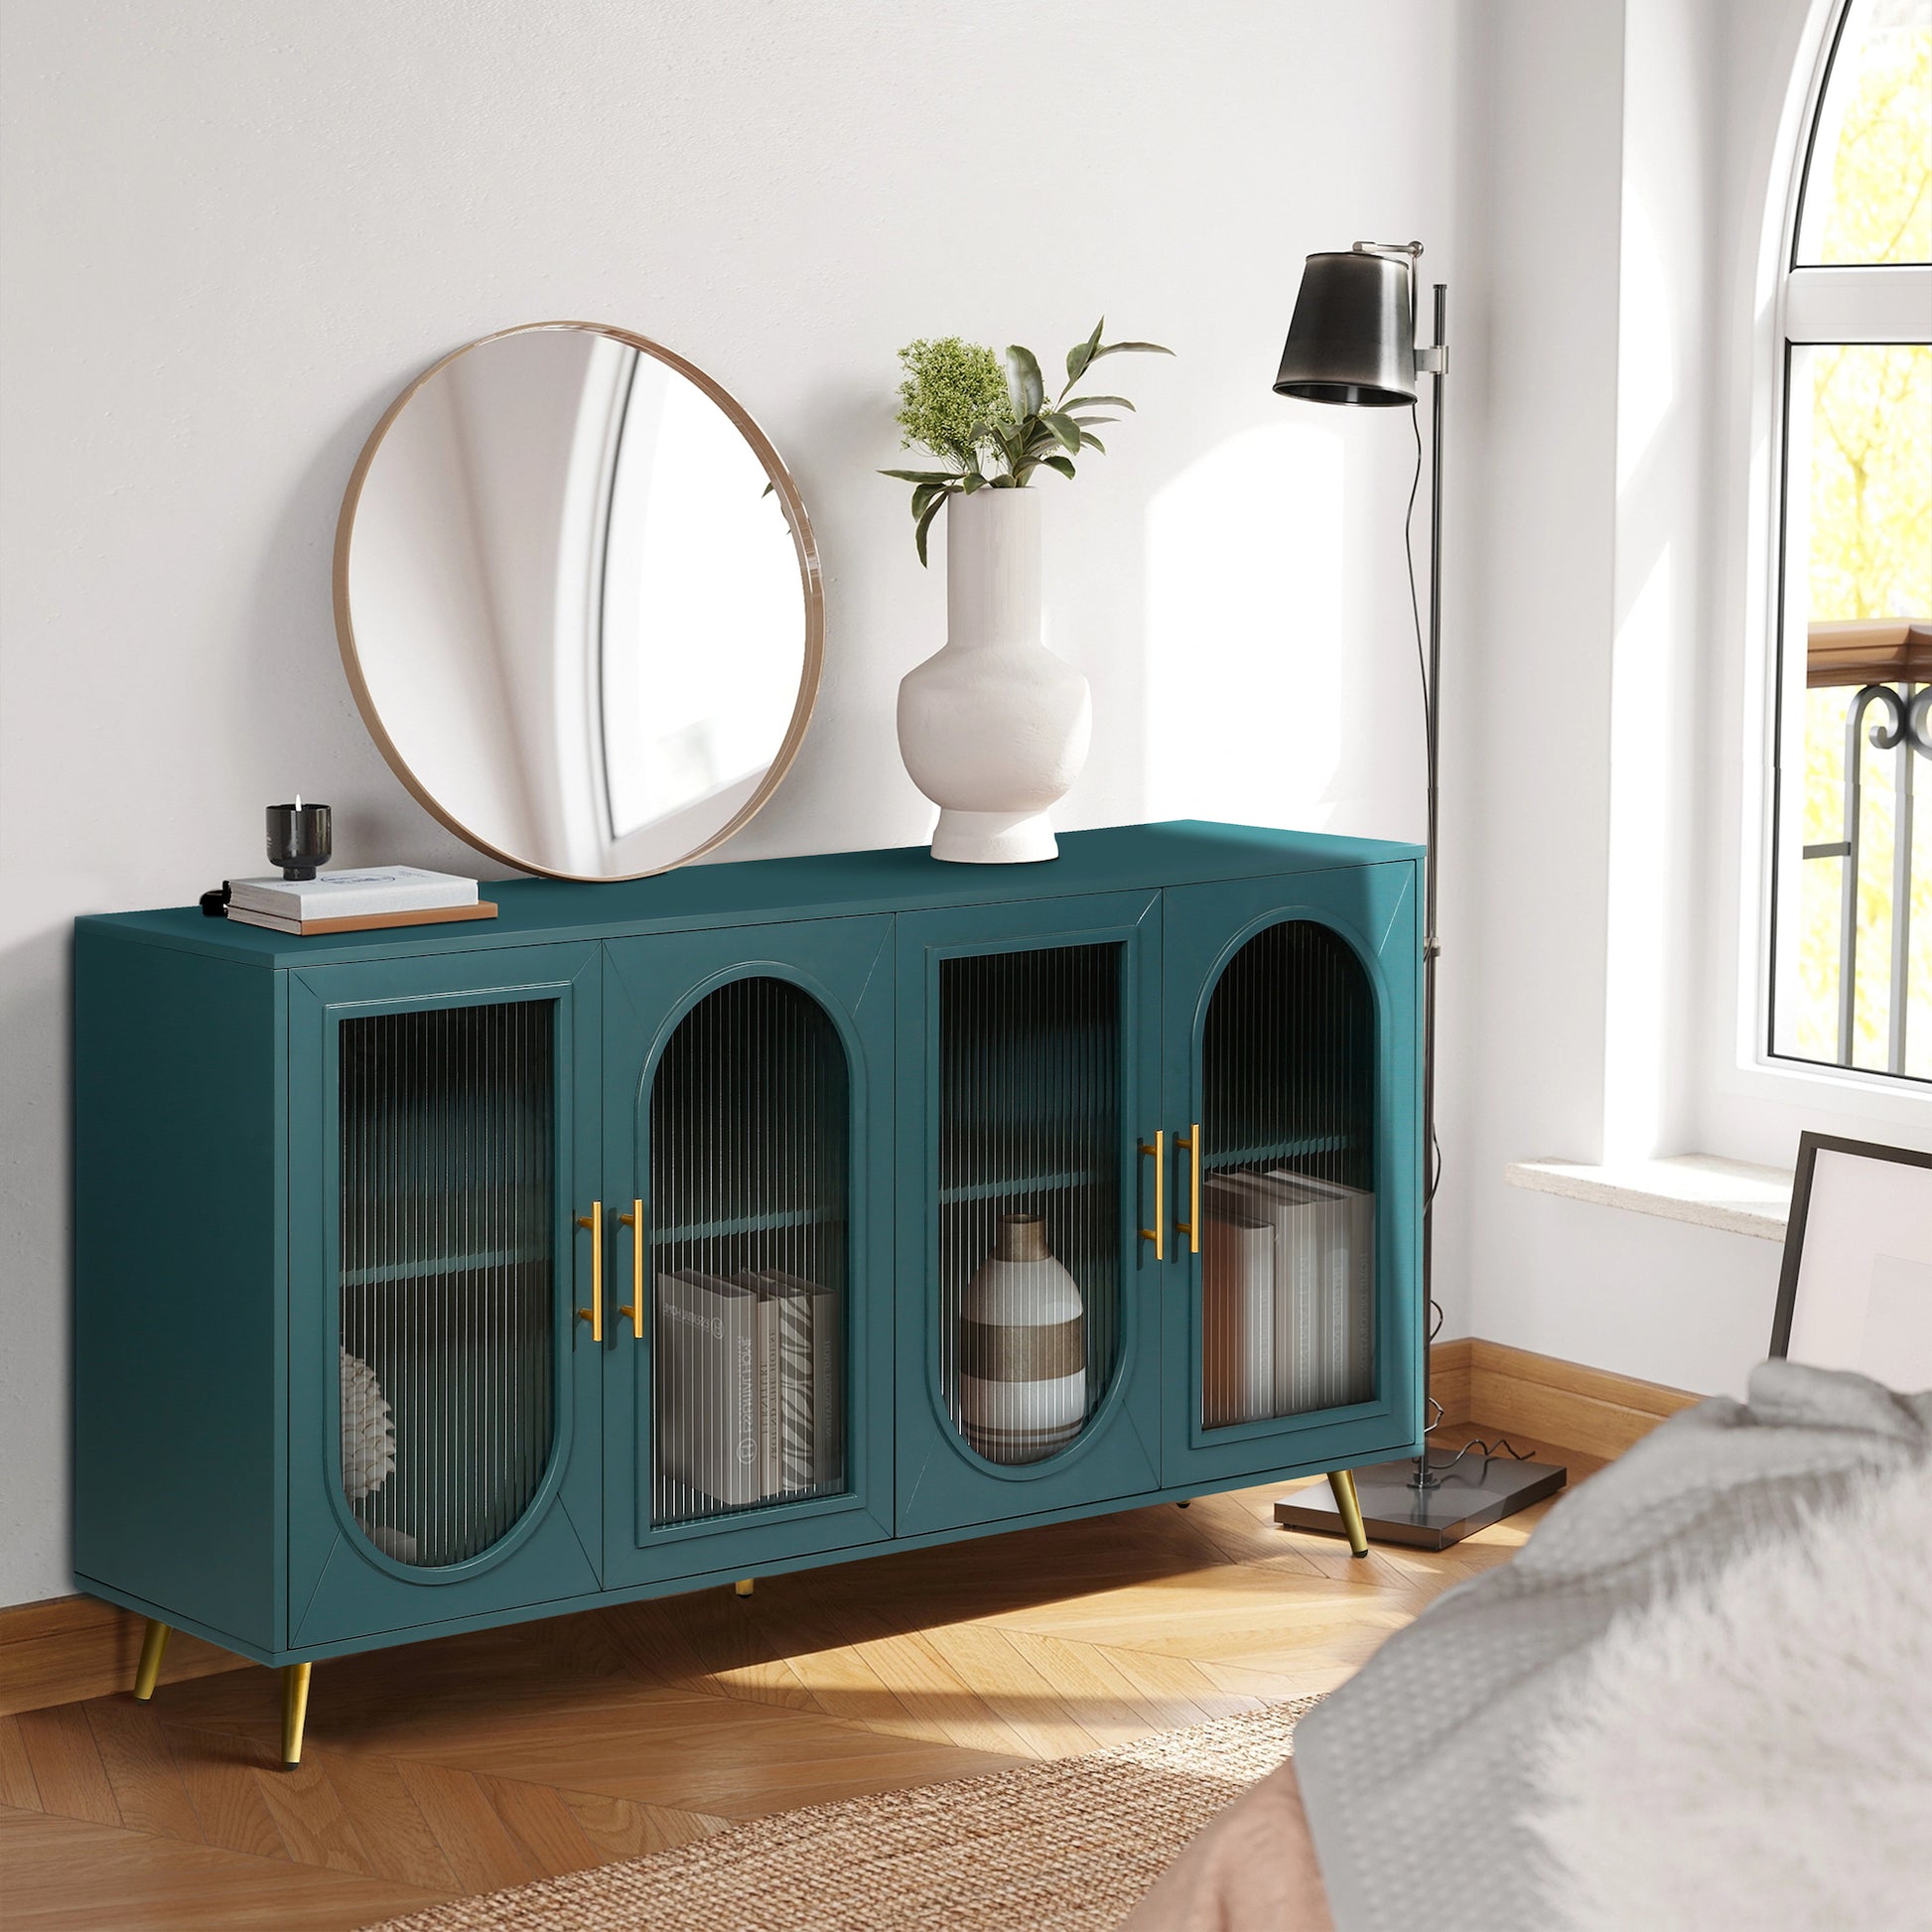 Zrun Accent Cabinet with Glass Door Fronts - Antique Blue